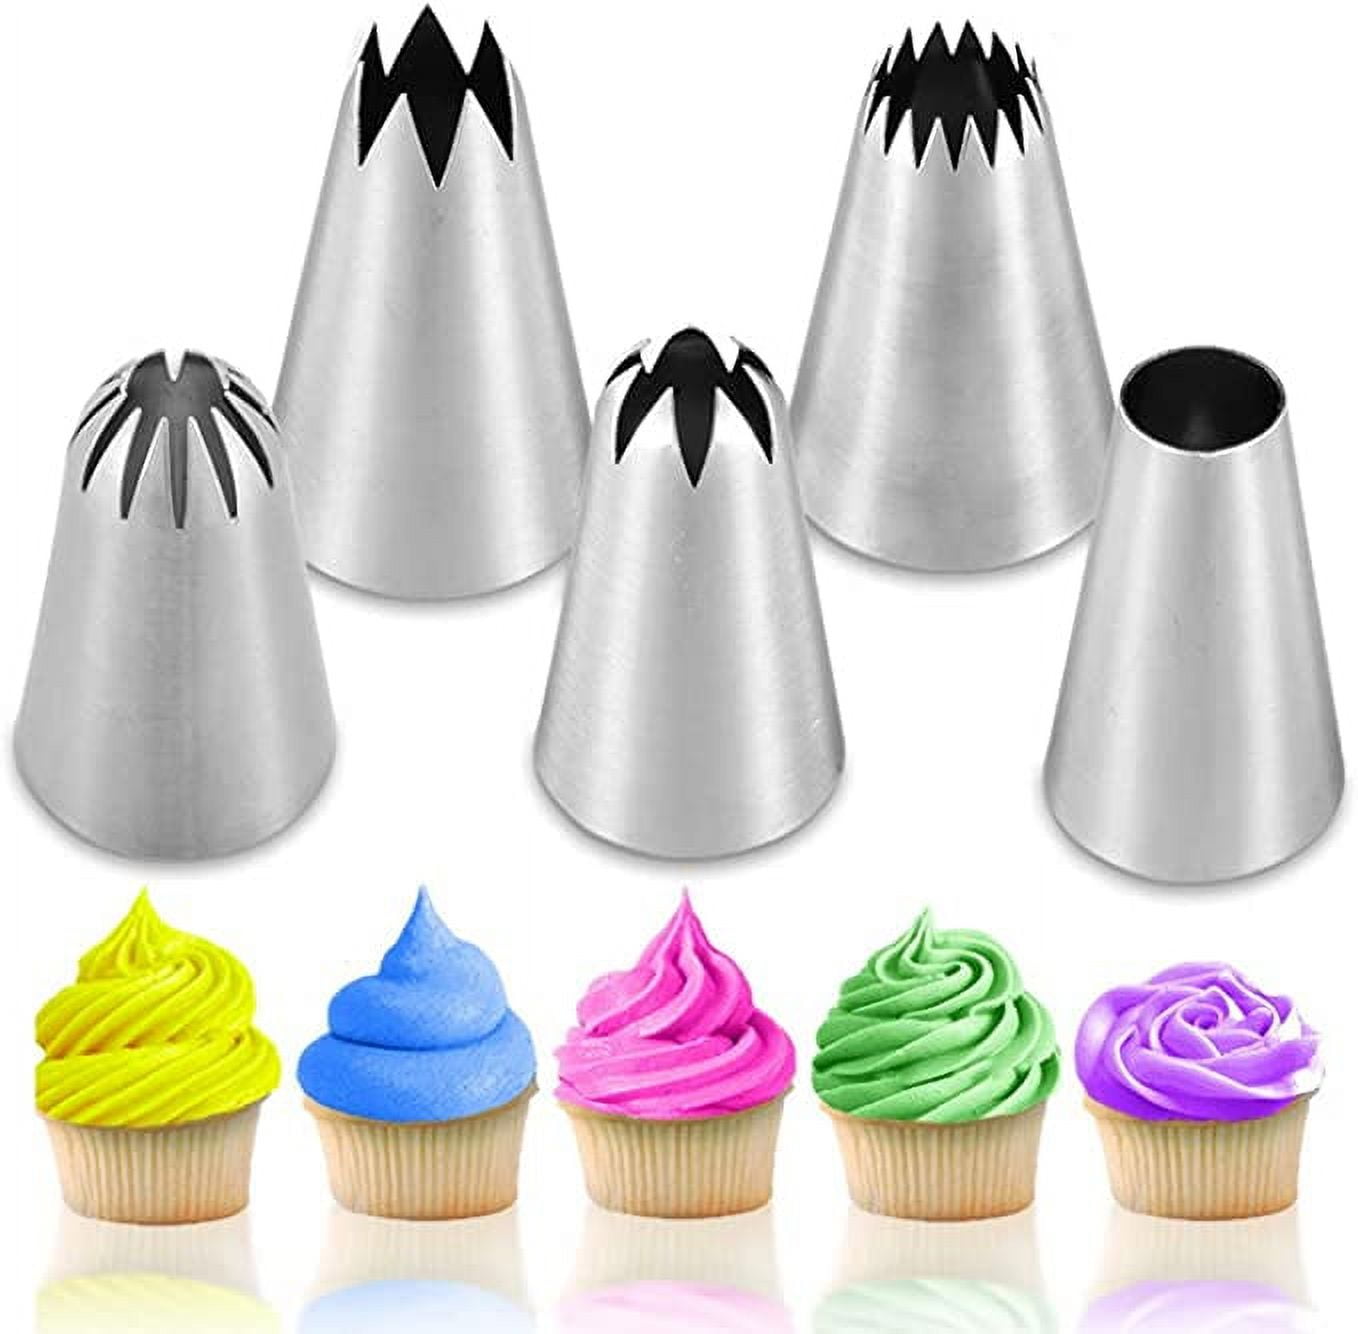 Suuker 3 Pcs Russian Piping Tips Set,V-shaped Wave Nozzles Piping Kit for  Pastry Cupcakes Cakes Cookies Decorating Stainless Steel Kitchen Gadgets